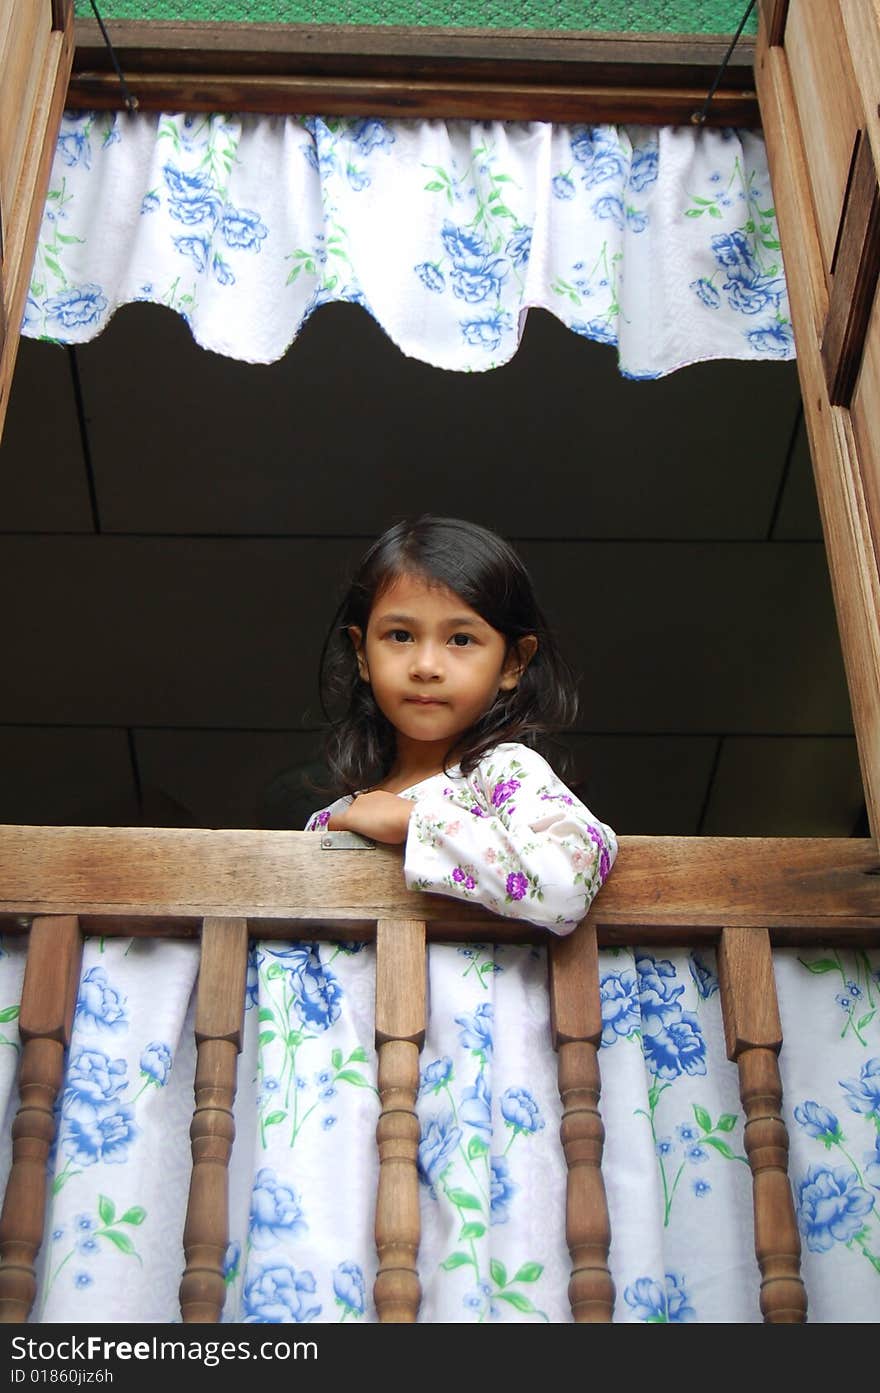 A Malaysian girl wearing malay traditional clothe standing by window in a traditional malay house.